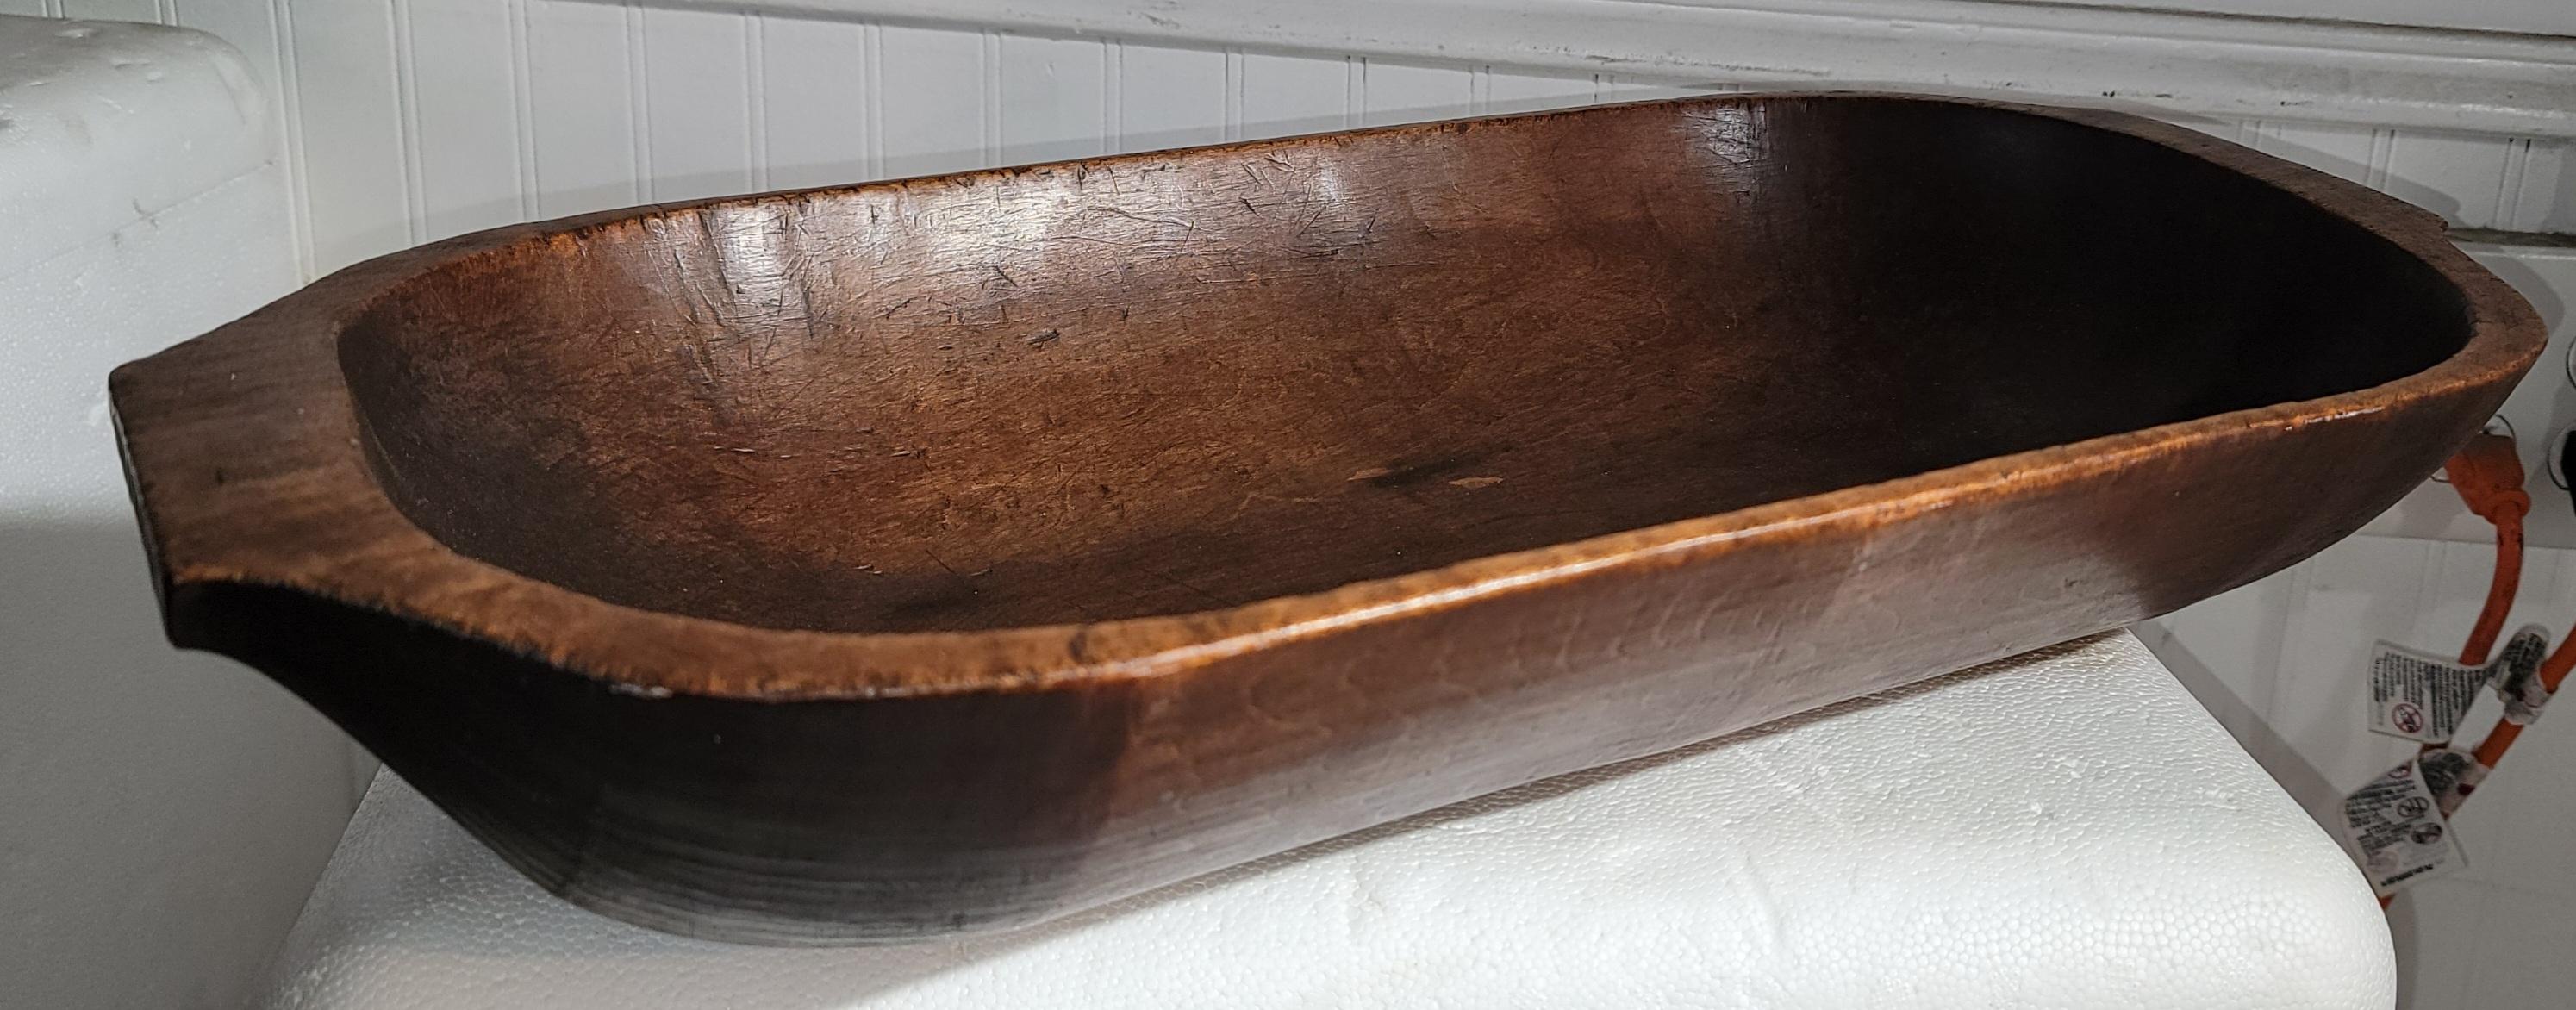 19Thc Hand Carved Dough Bowl From New England For Sale 3